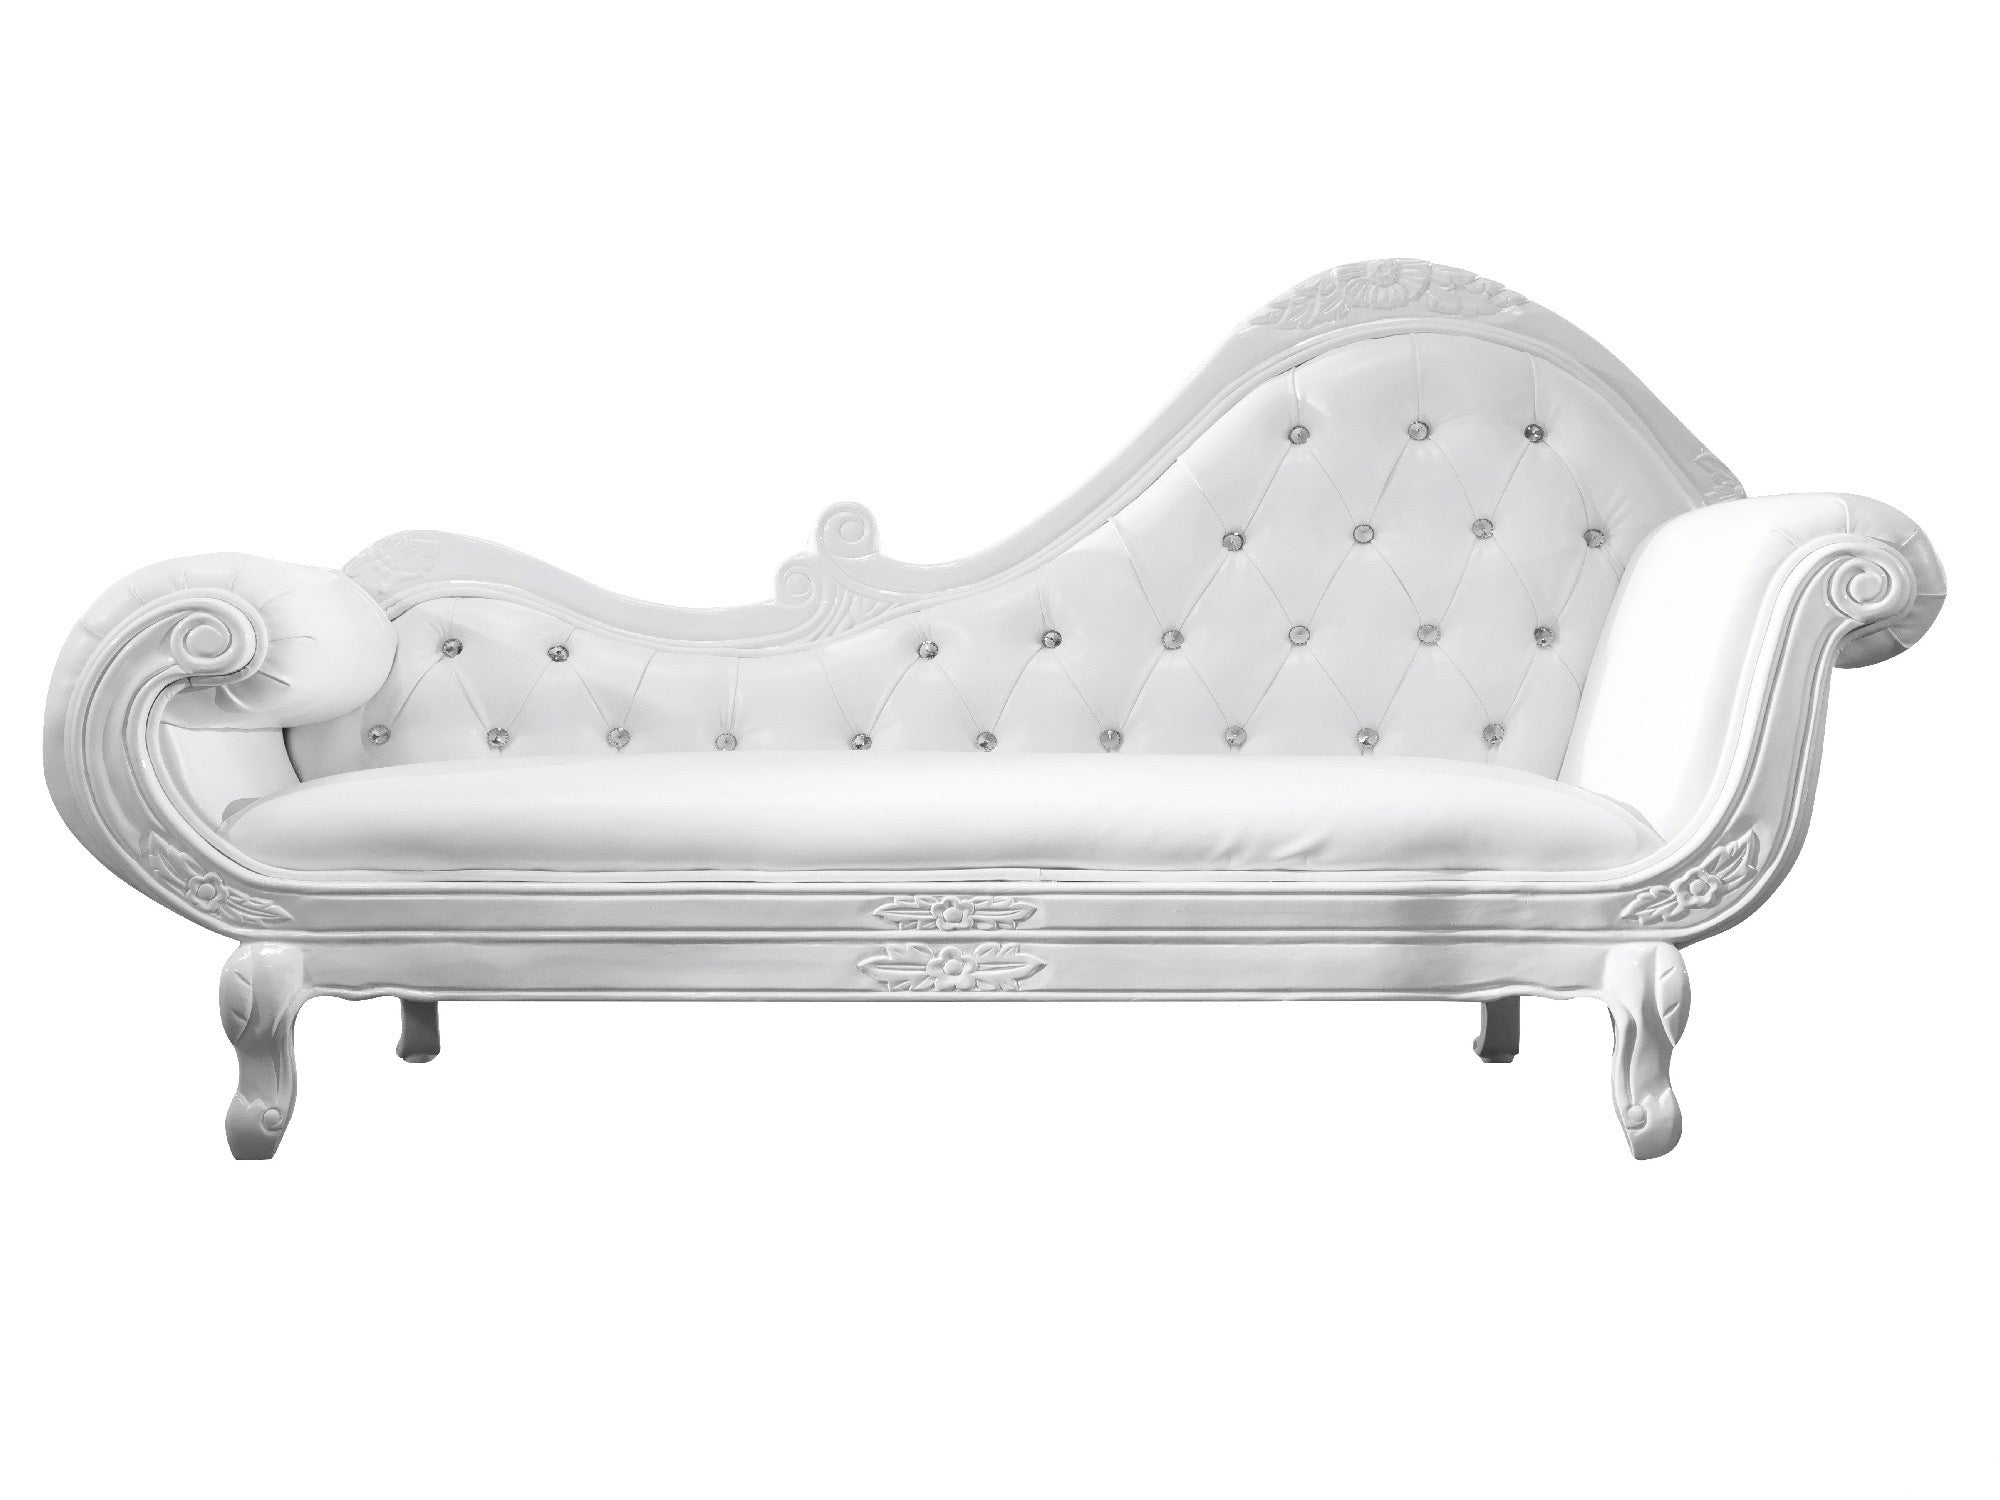 McQUEEN CHAISE LOUNGE